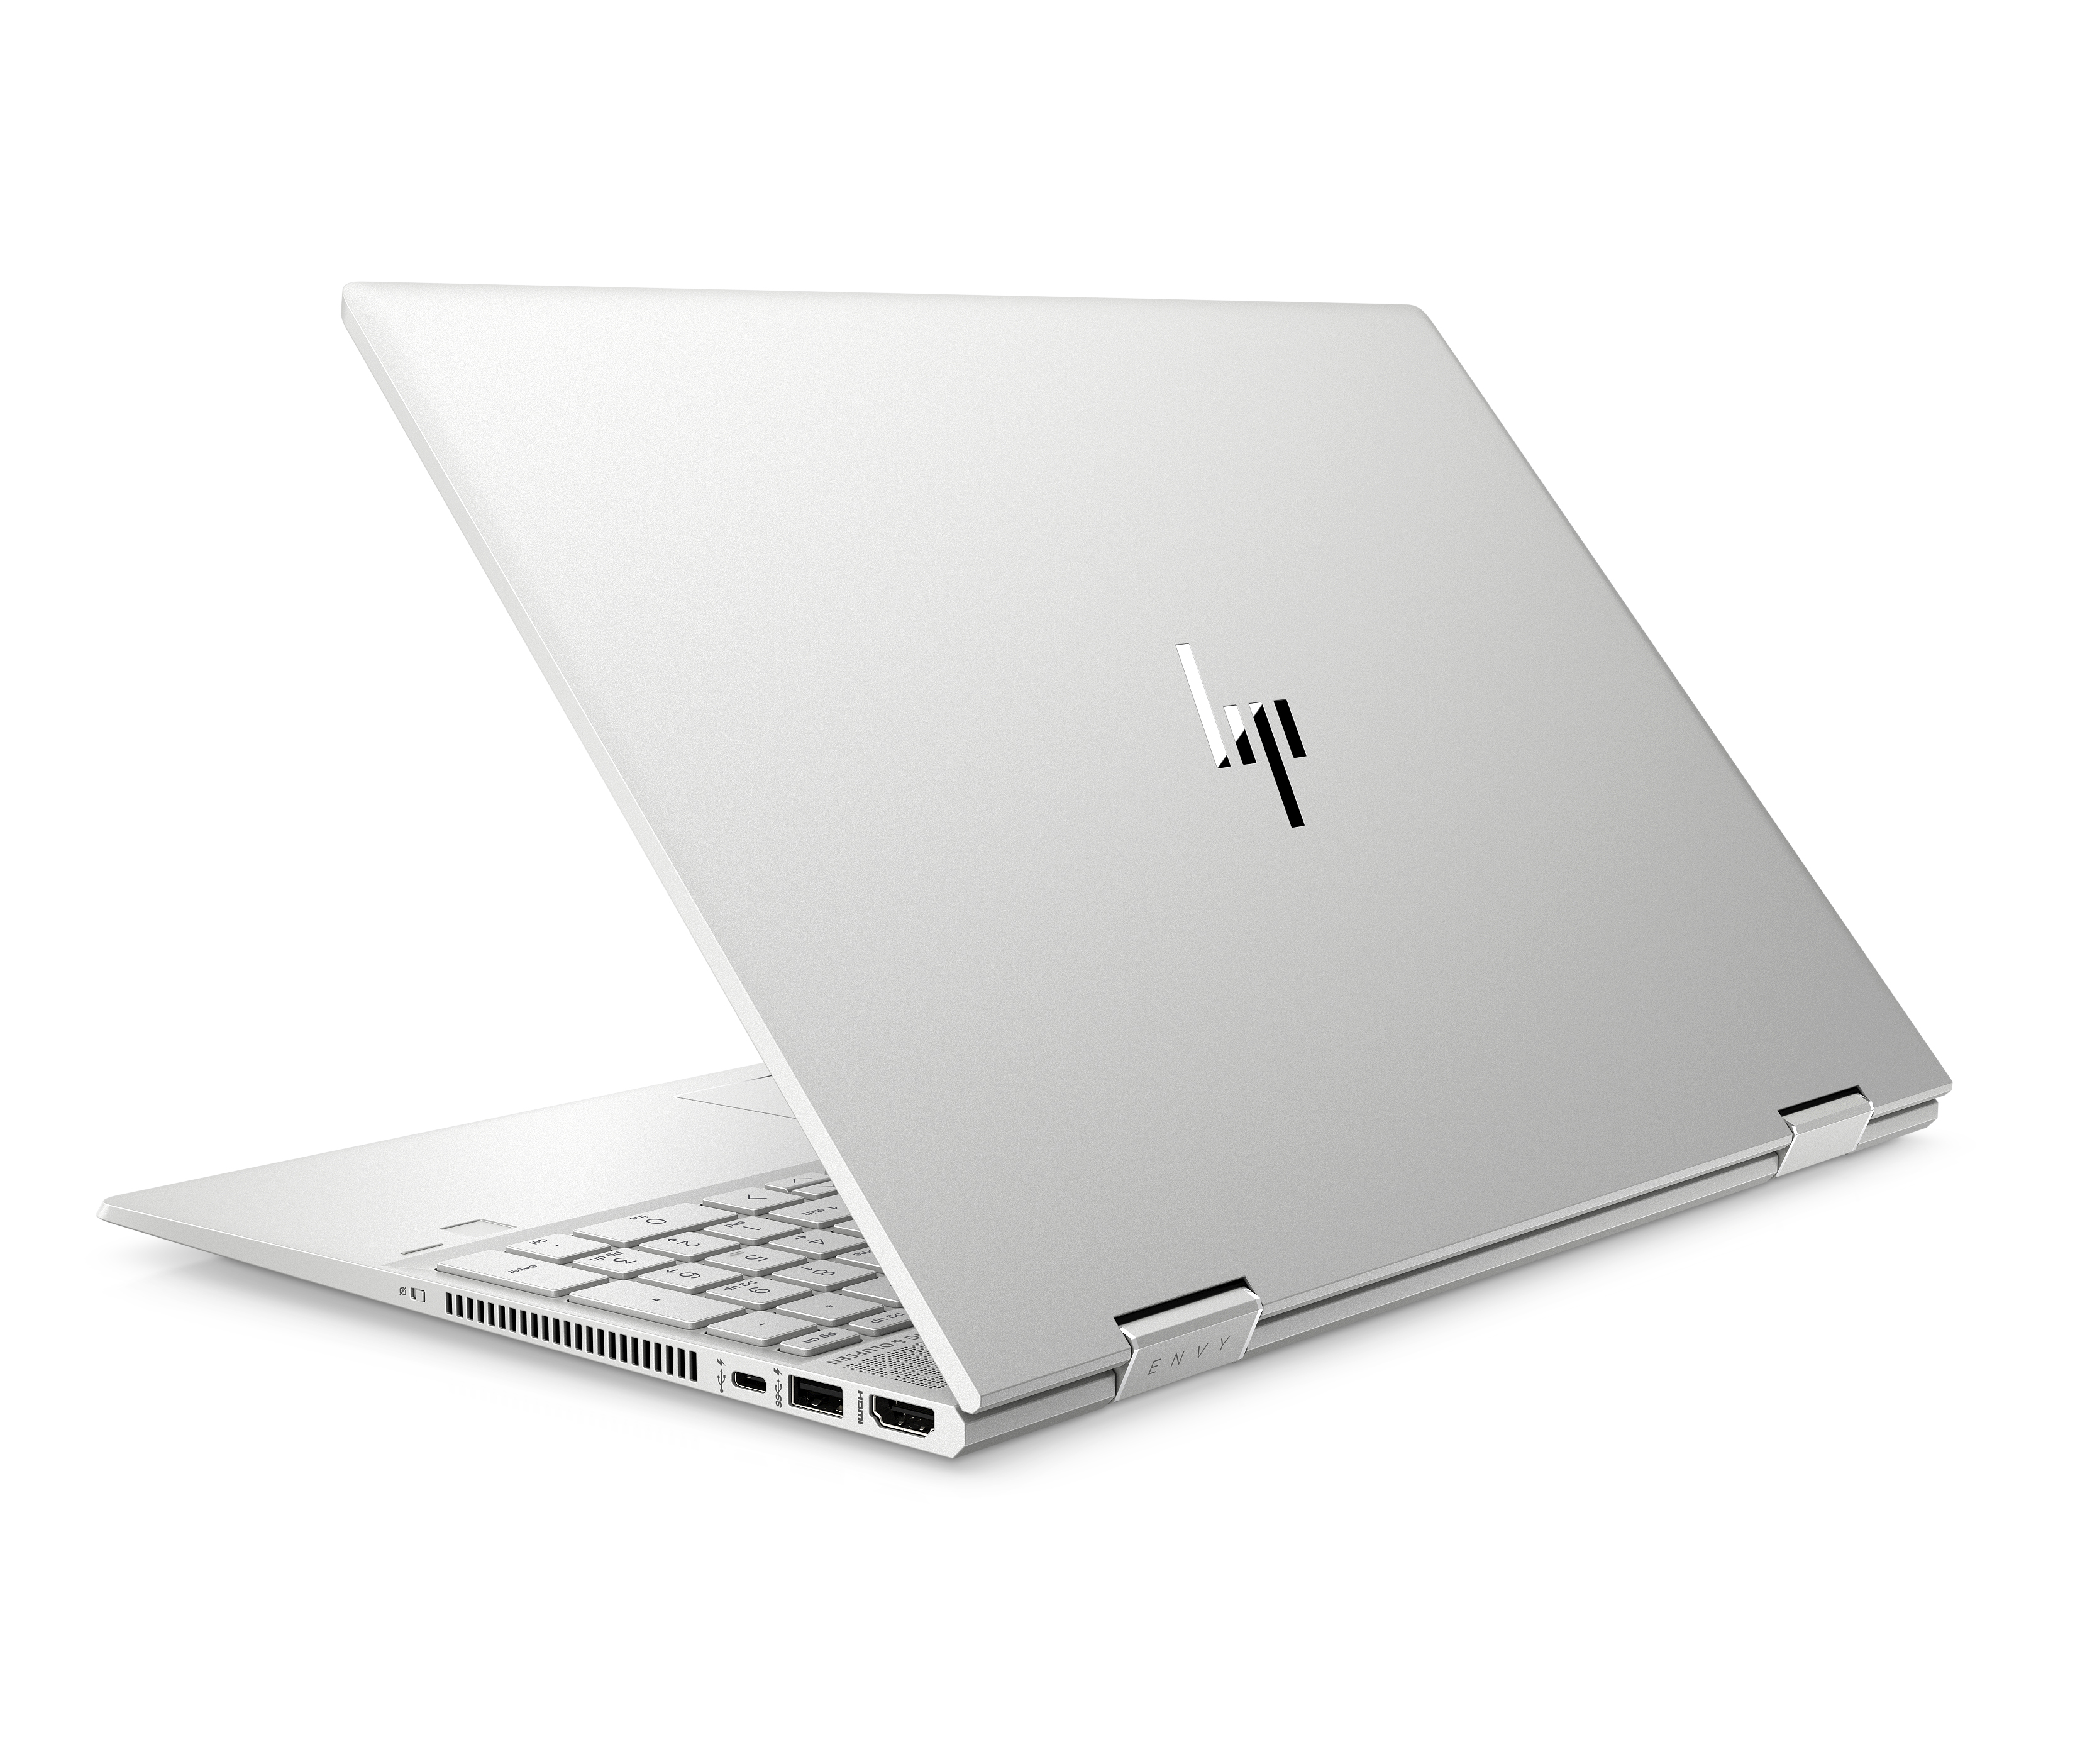 HP ENVY x360 Convertible 15-dr1010nr 15.6" With Intel Core i7-10510U 8GB DDR4 512GB SSD Windows 10 Home Laptop - image 5 of 5